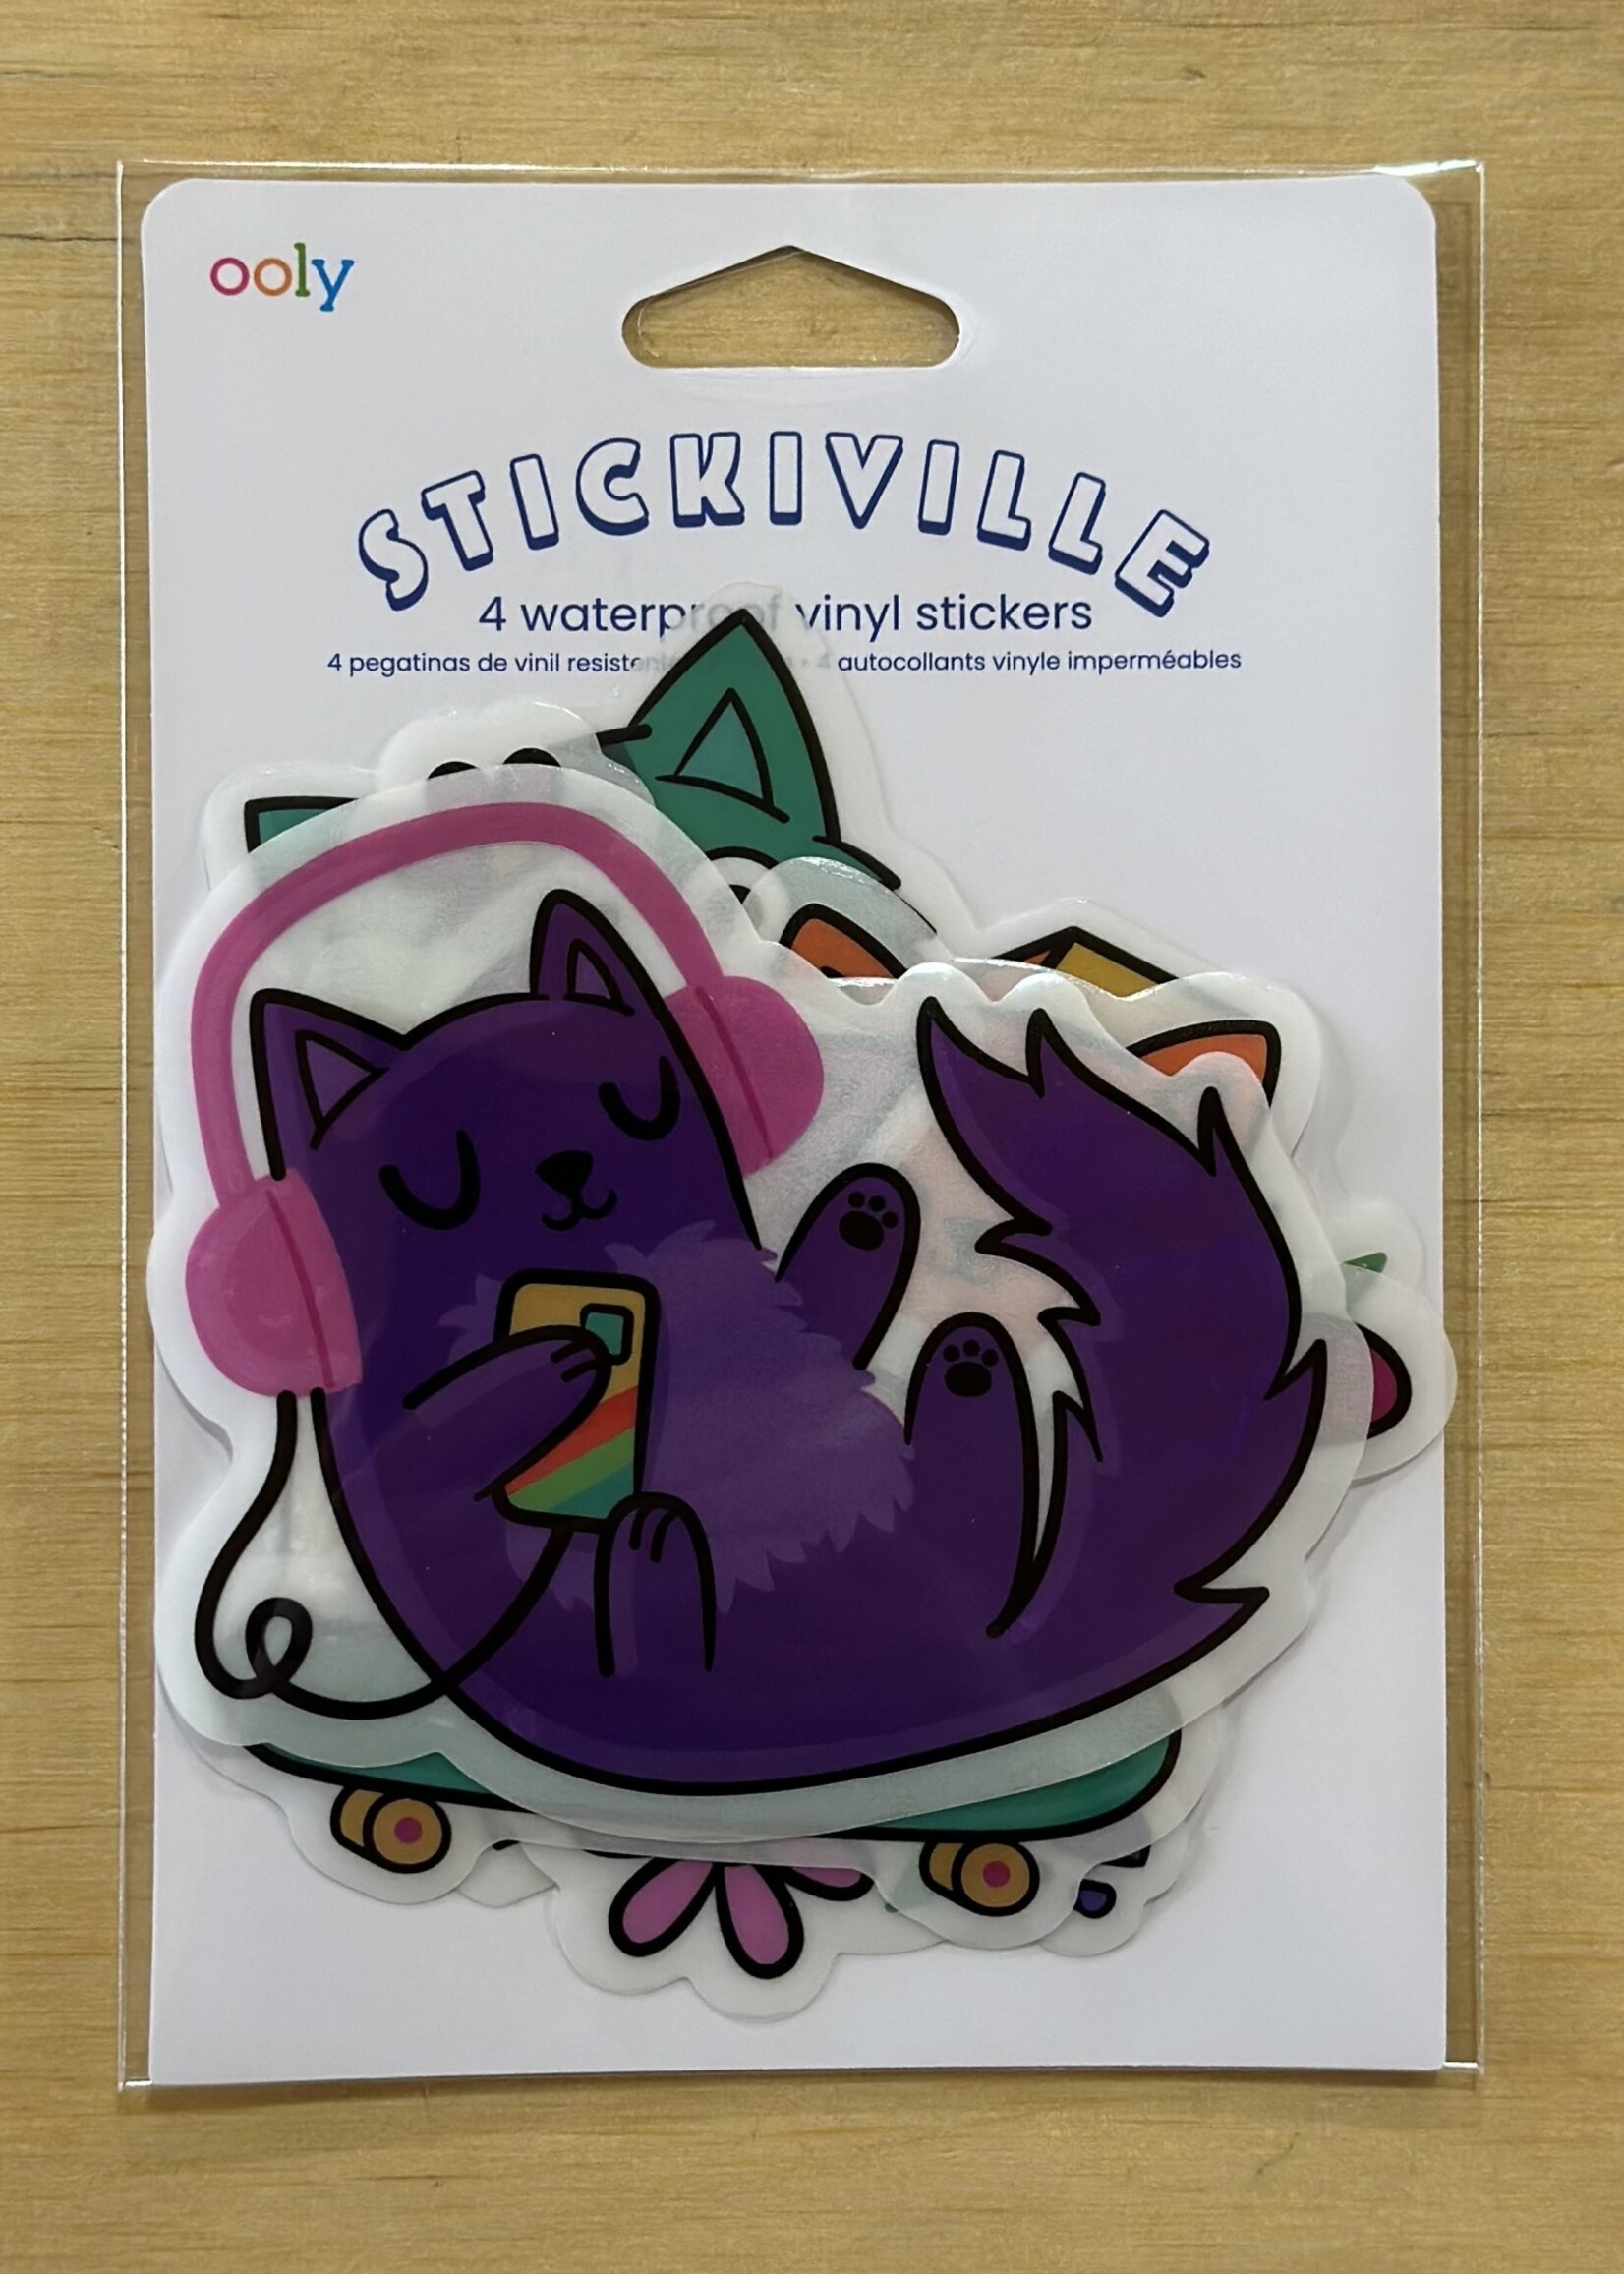 Stickiville Stickers - Silly Kittens